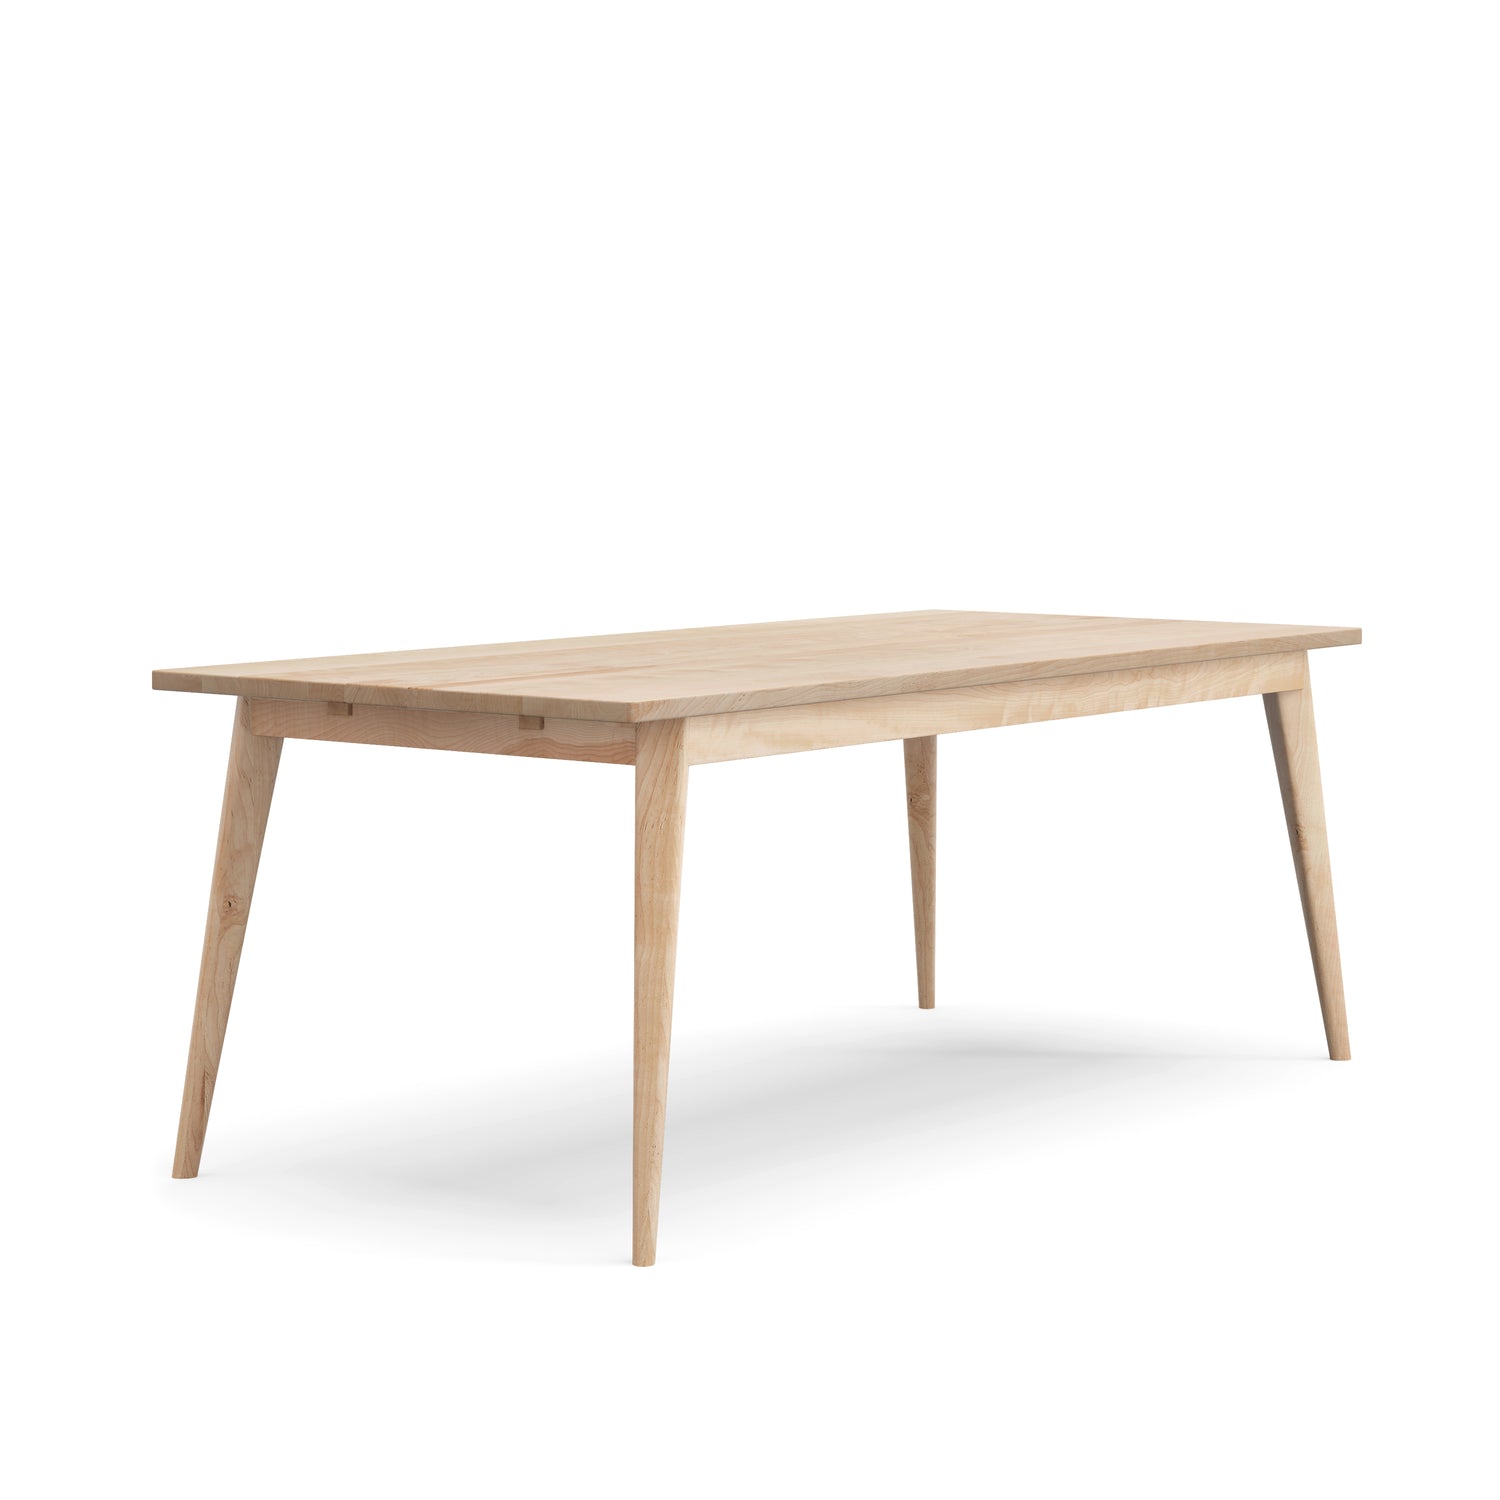 Oslo cherry wood table - 78 x36 in. - 2849